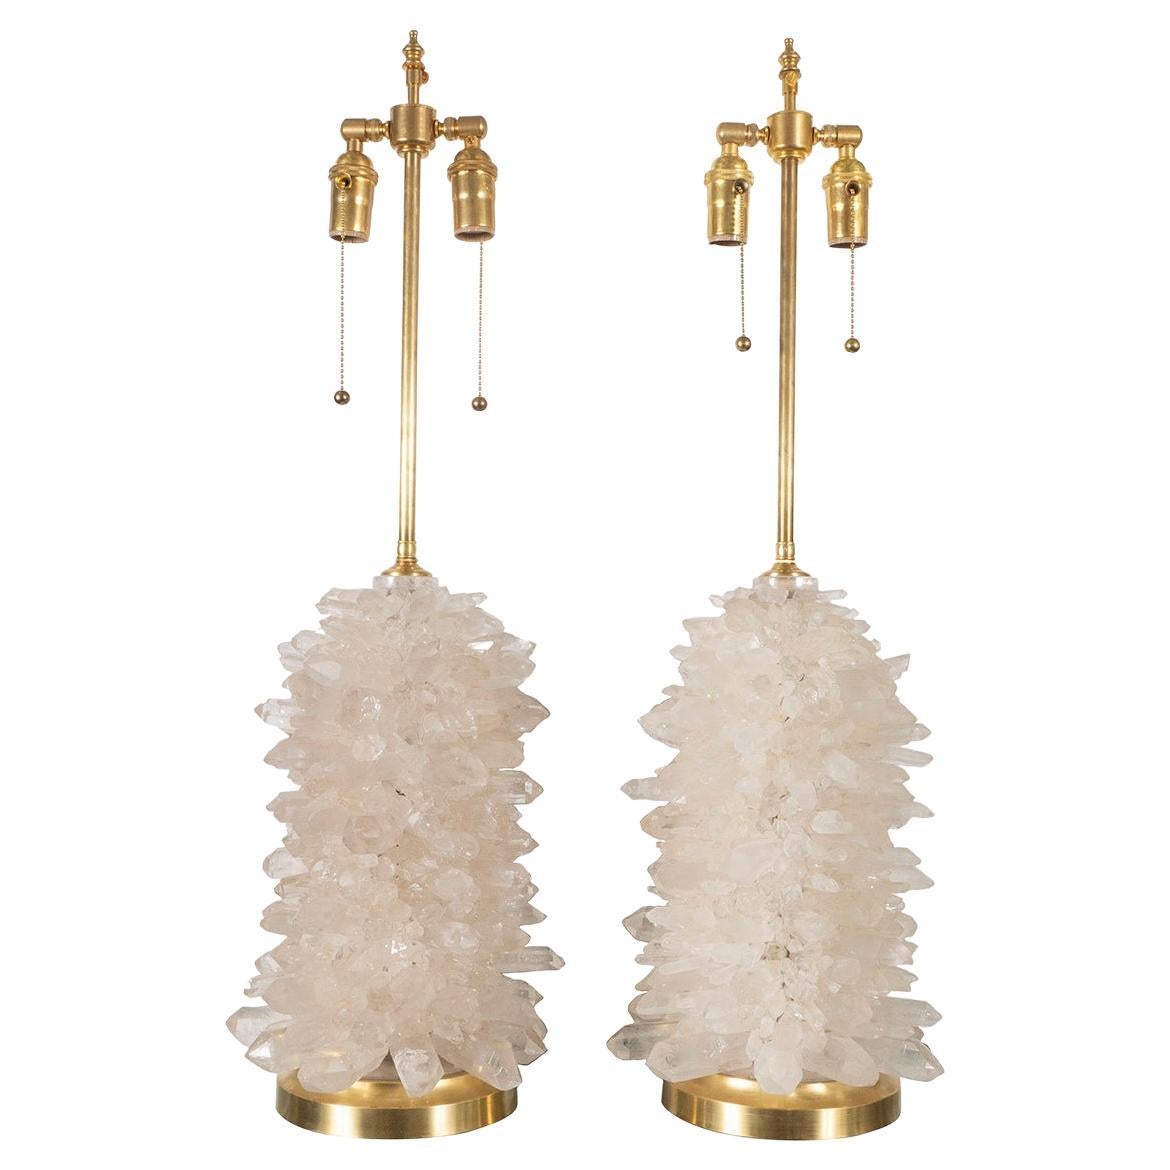 Pair of "Aggregate" Rock Crystal Cluster Lamps by Spark Interior For Sale